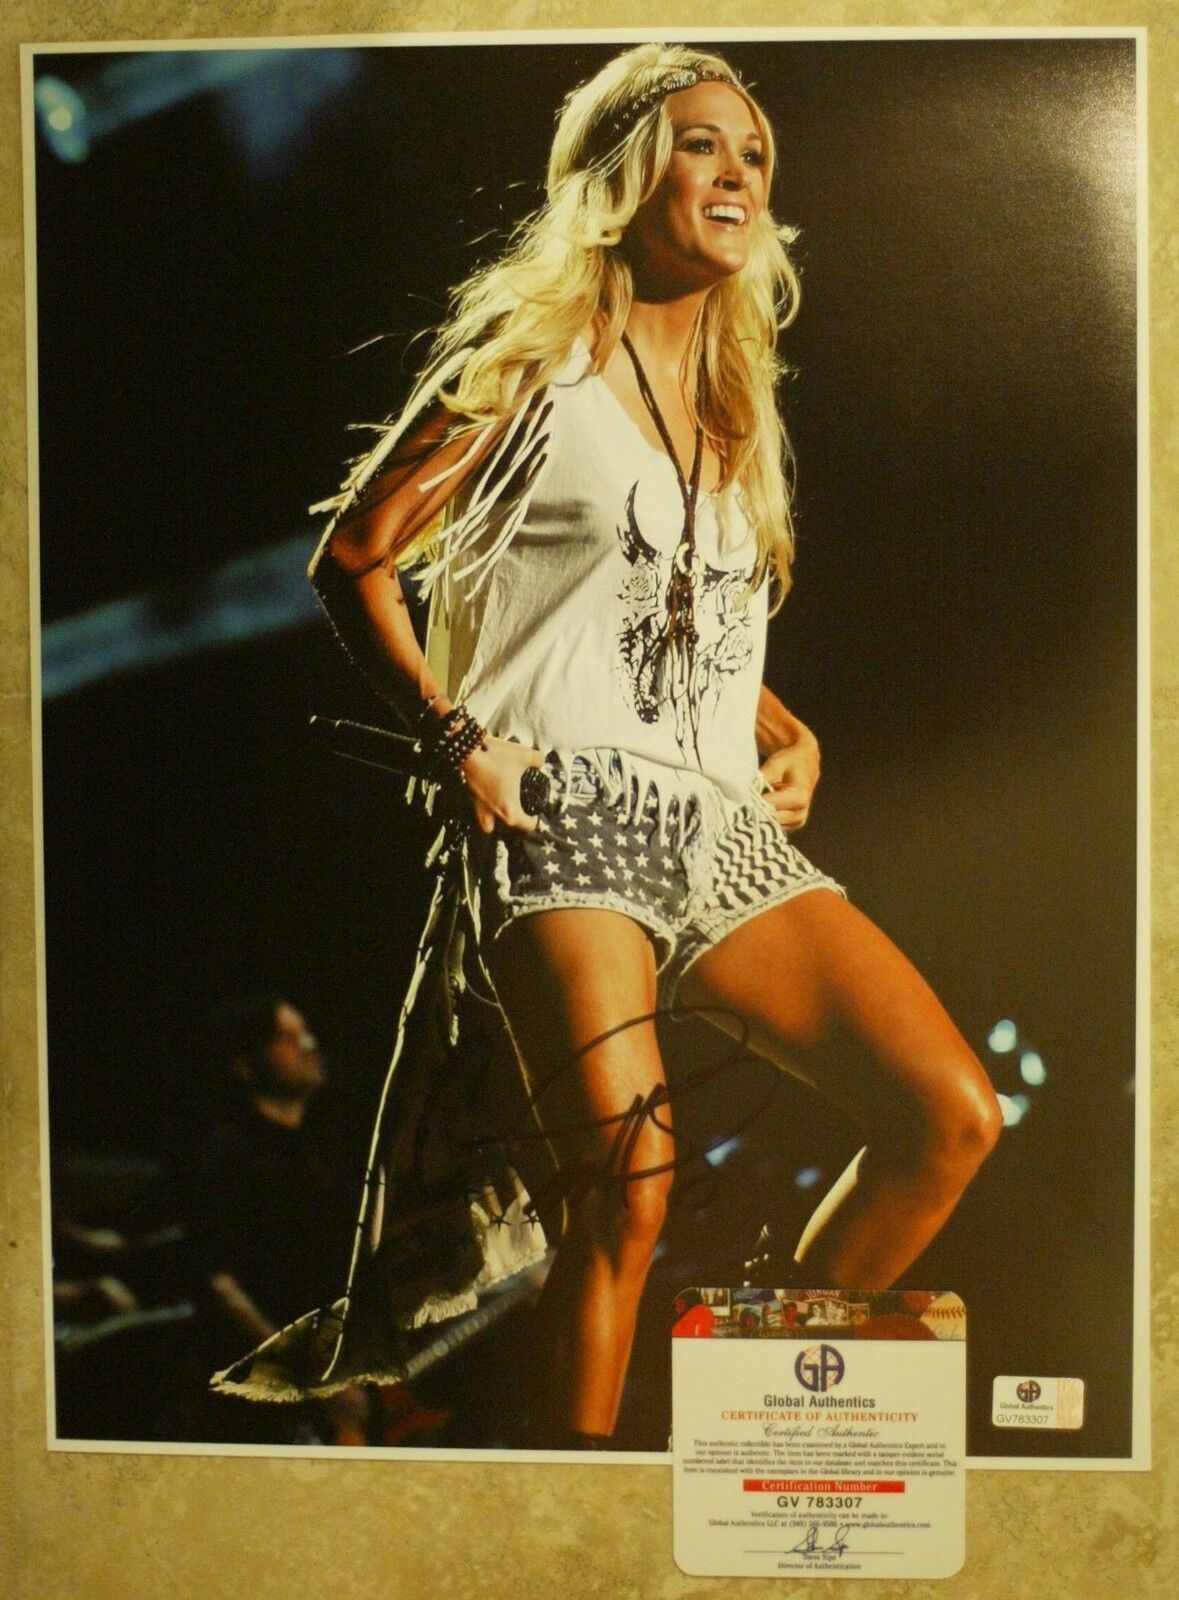 Carrie Underwood Signed 11x14 Photo Poster painting Autographed Auto GA GAI COA Storyteller